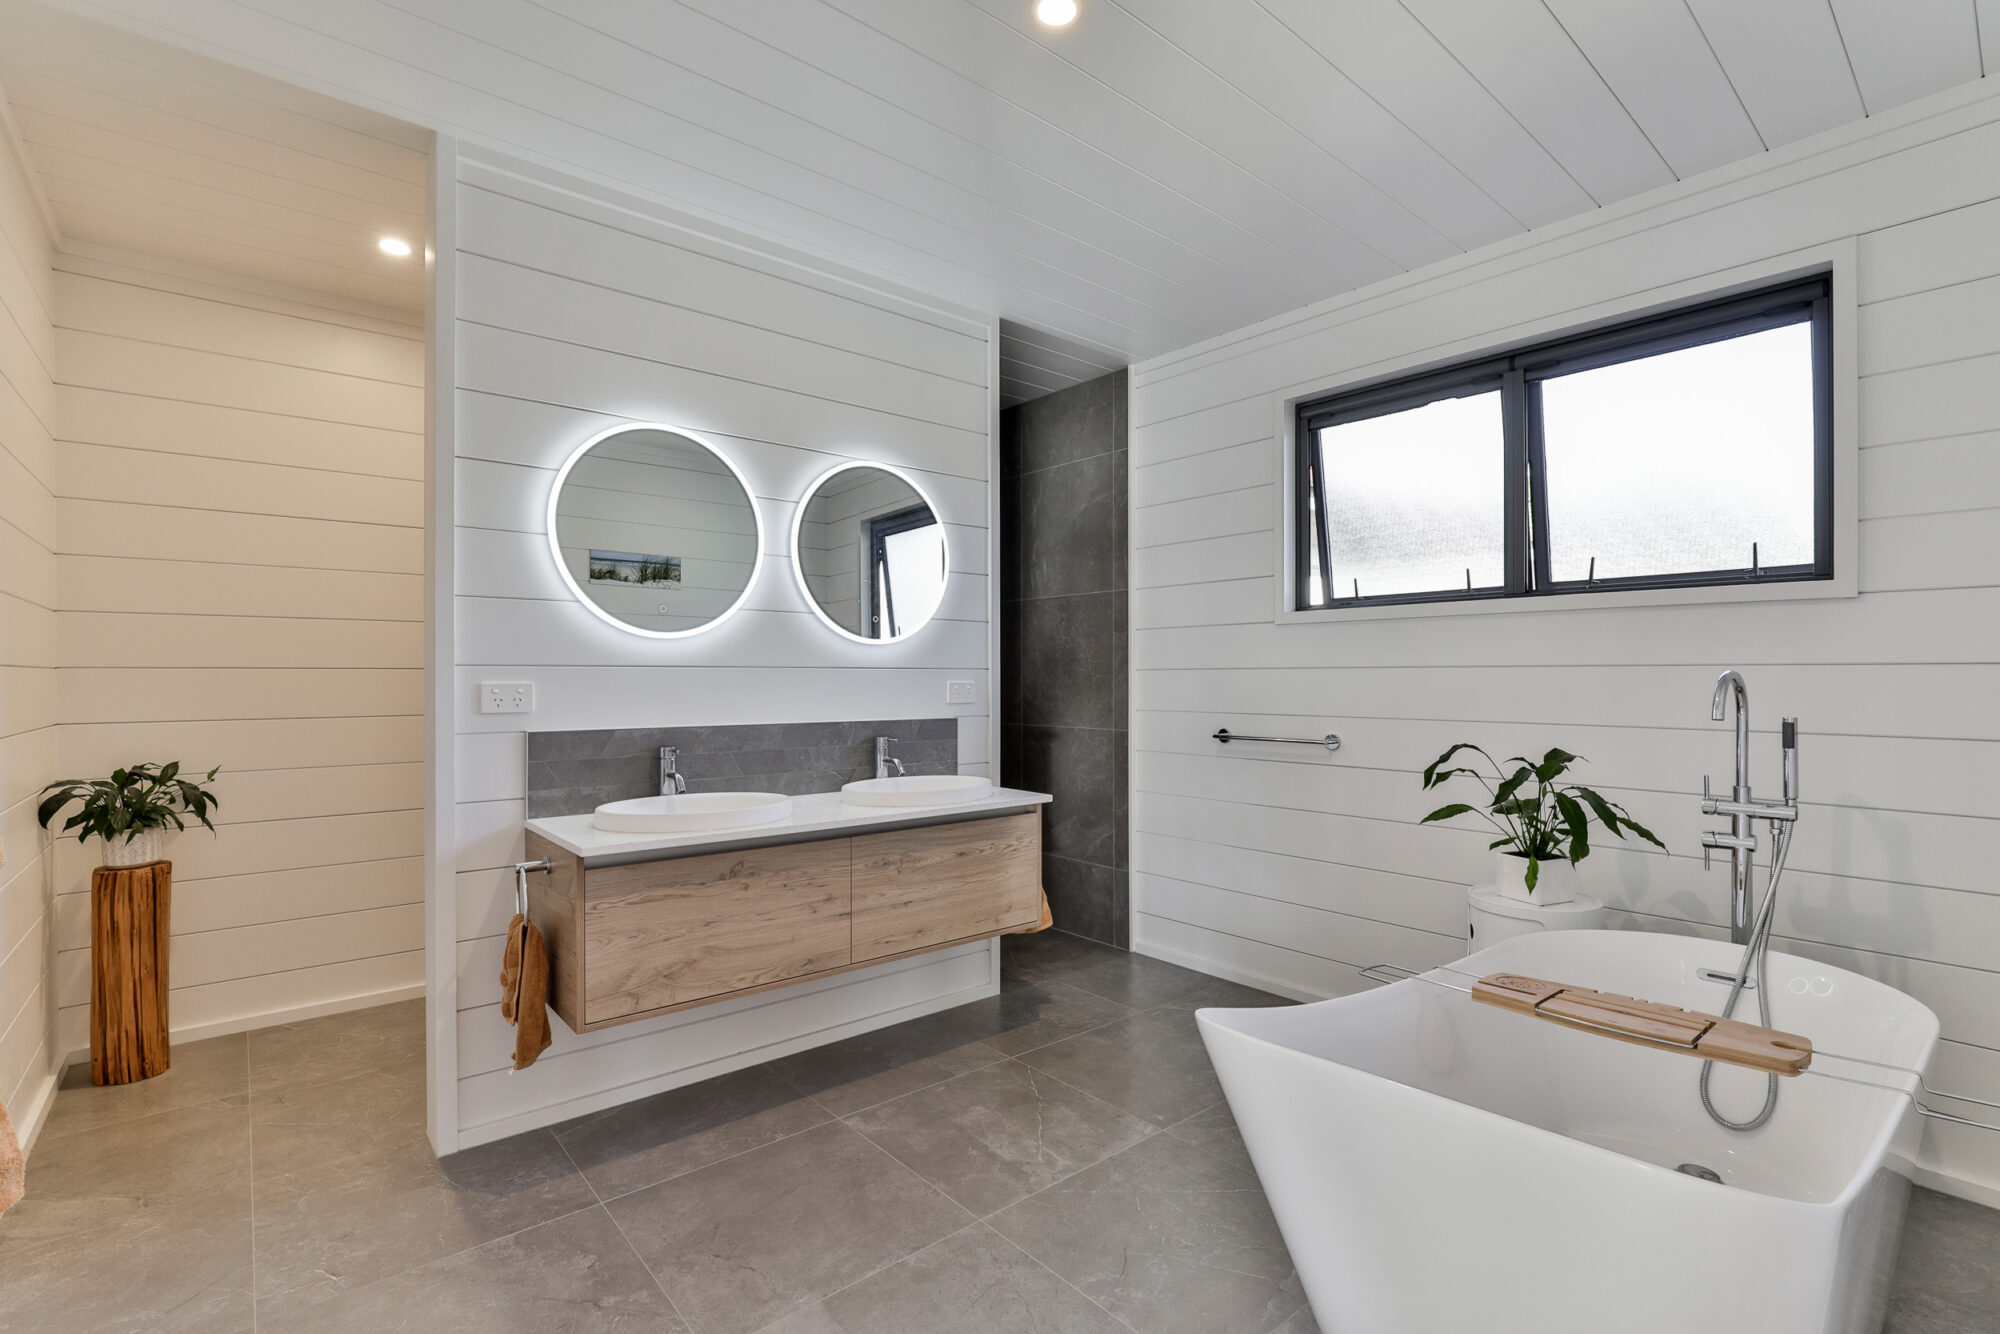 Modern bathroom with painted walls